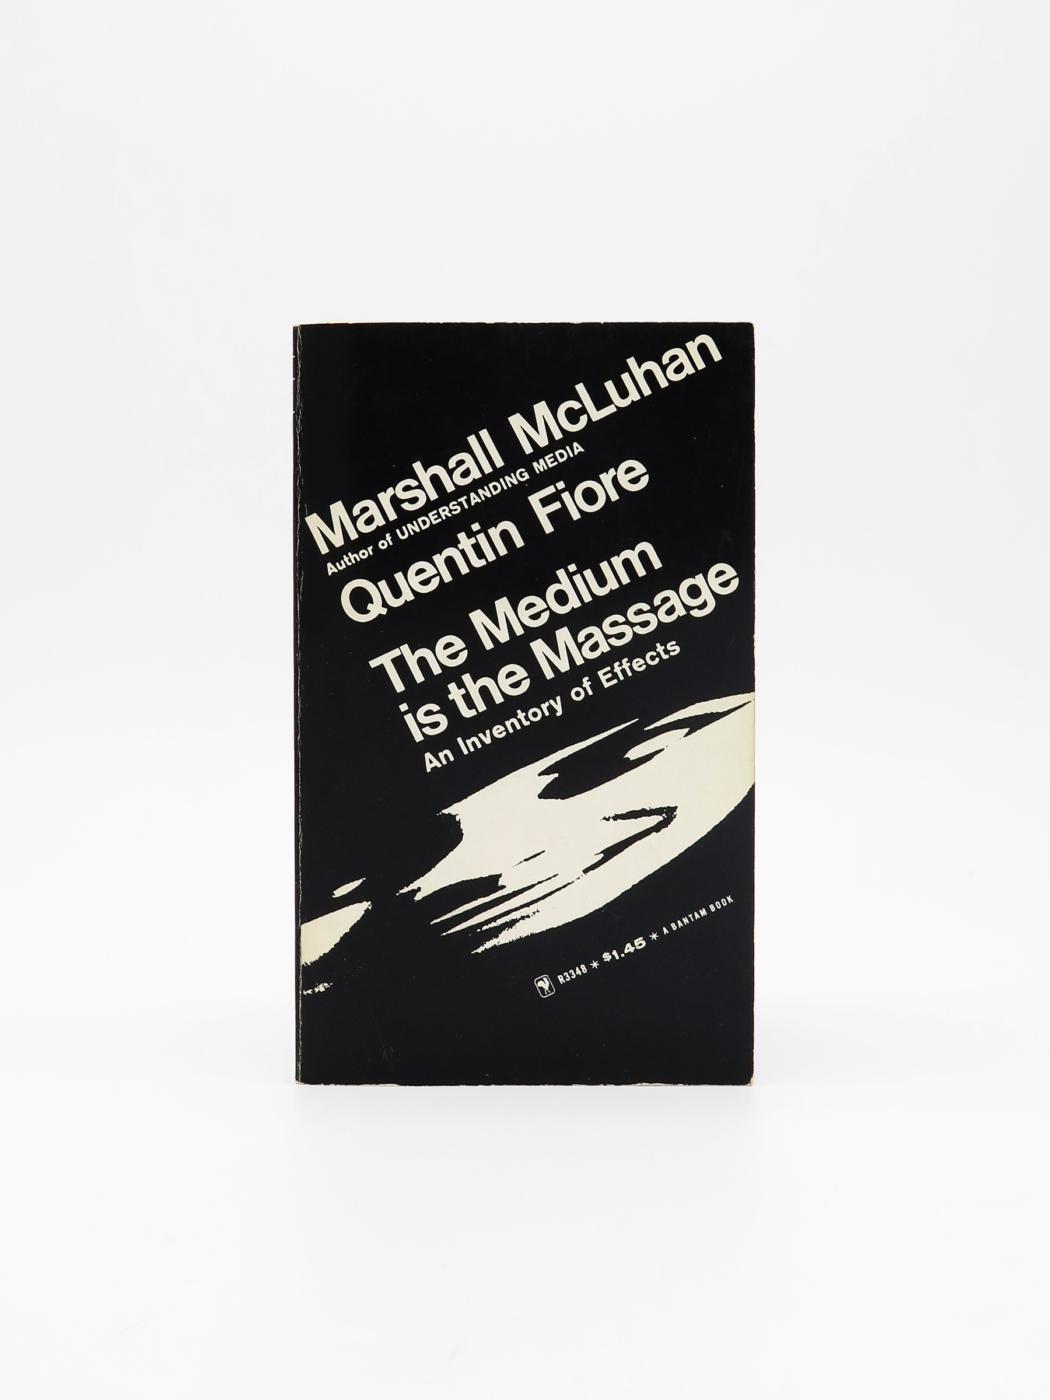 Marshall McLuhan, Quentin Fiore, The Medium is the Massage